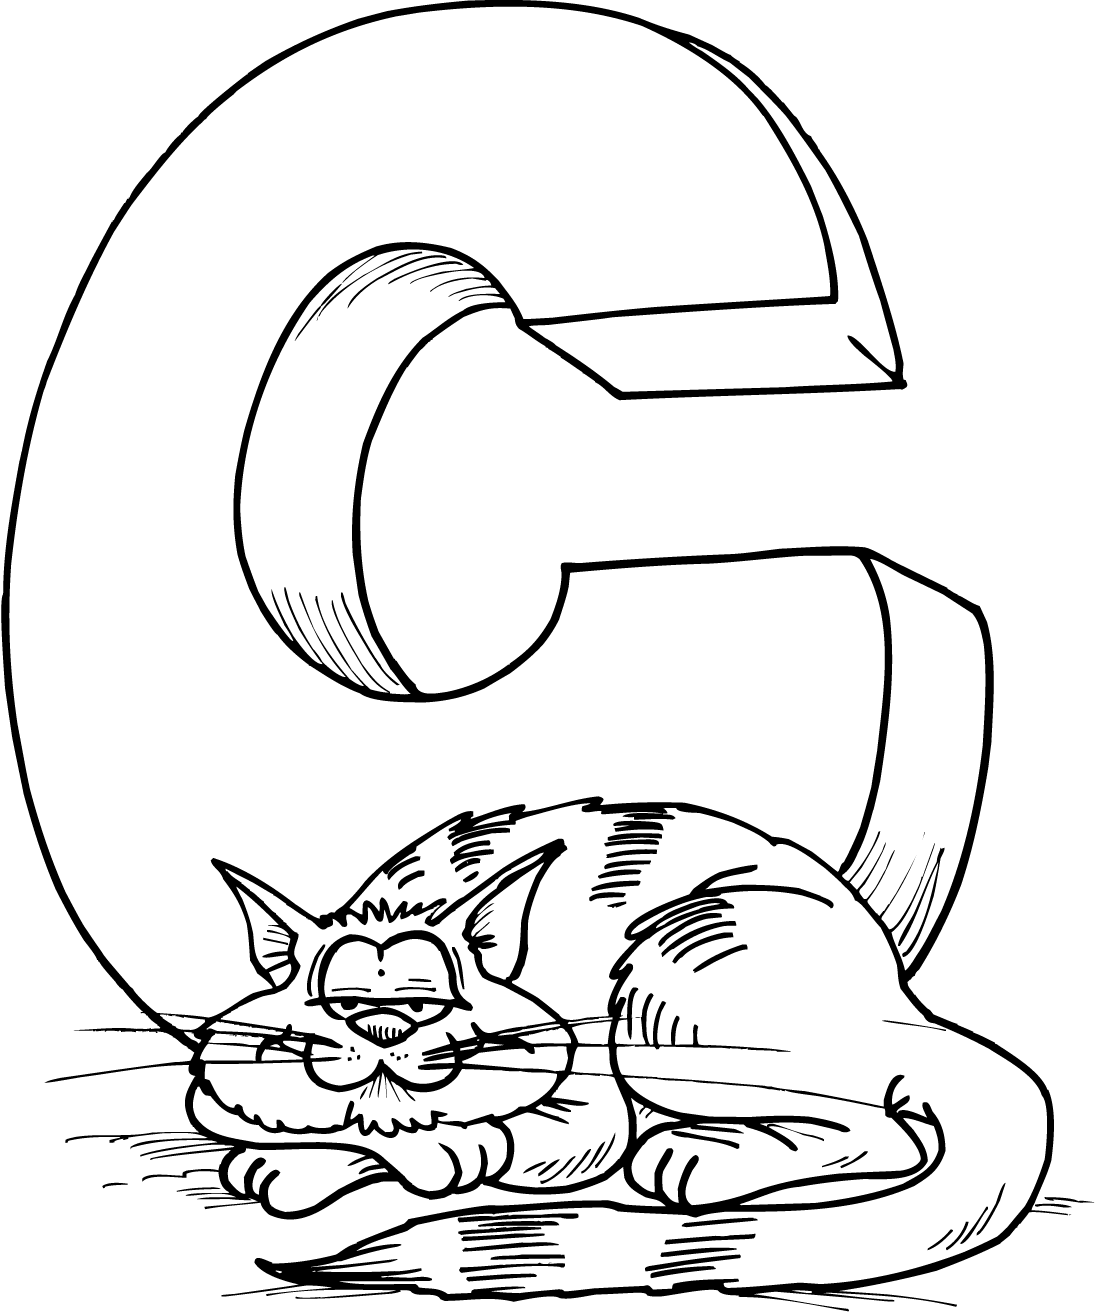 letter-C-for-Cat-colouring-page